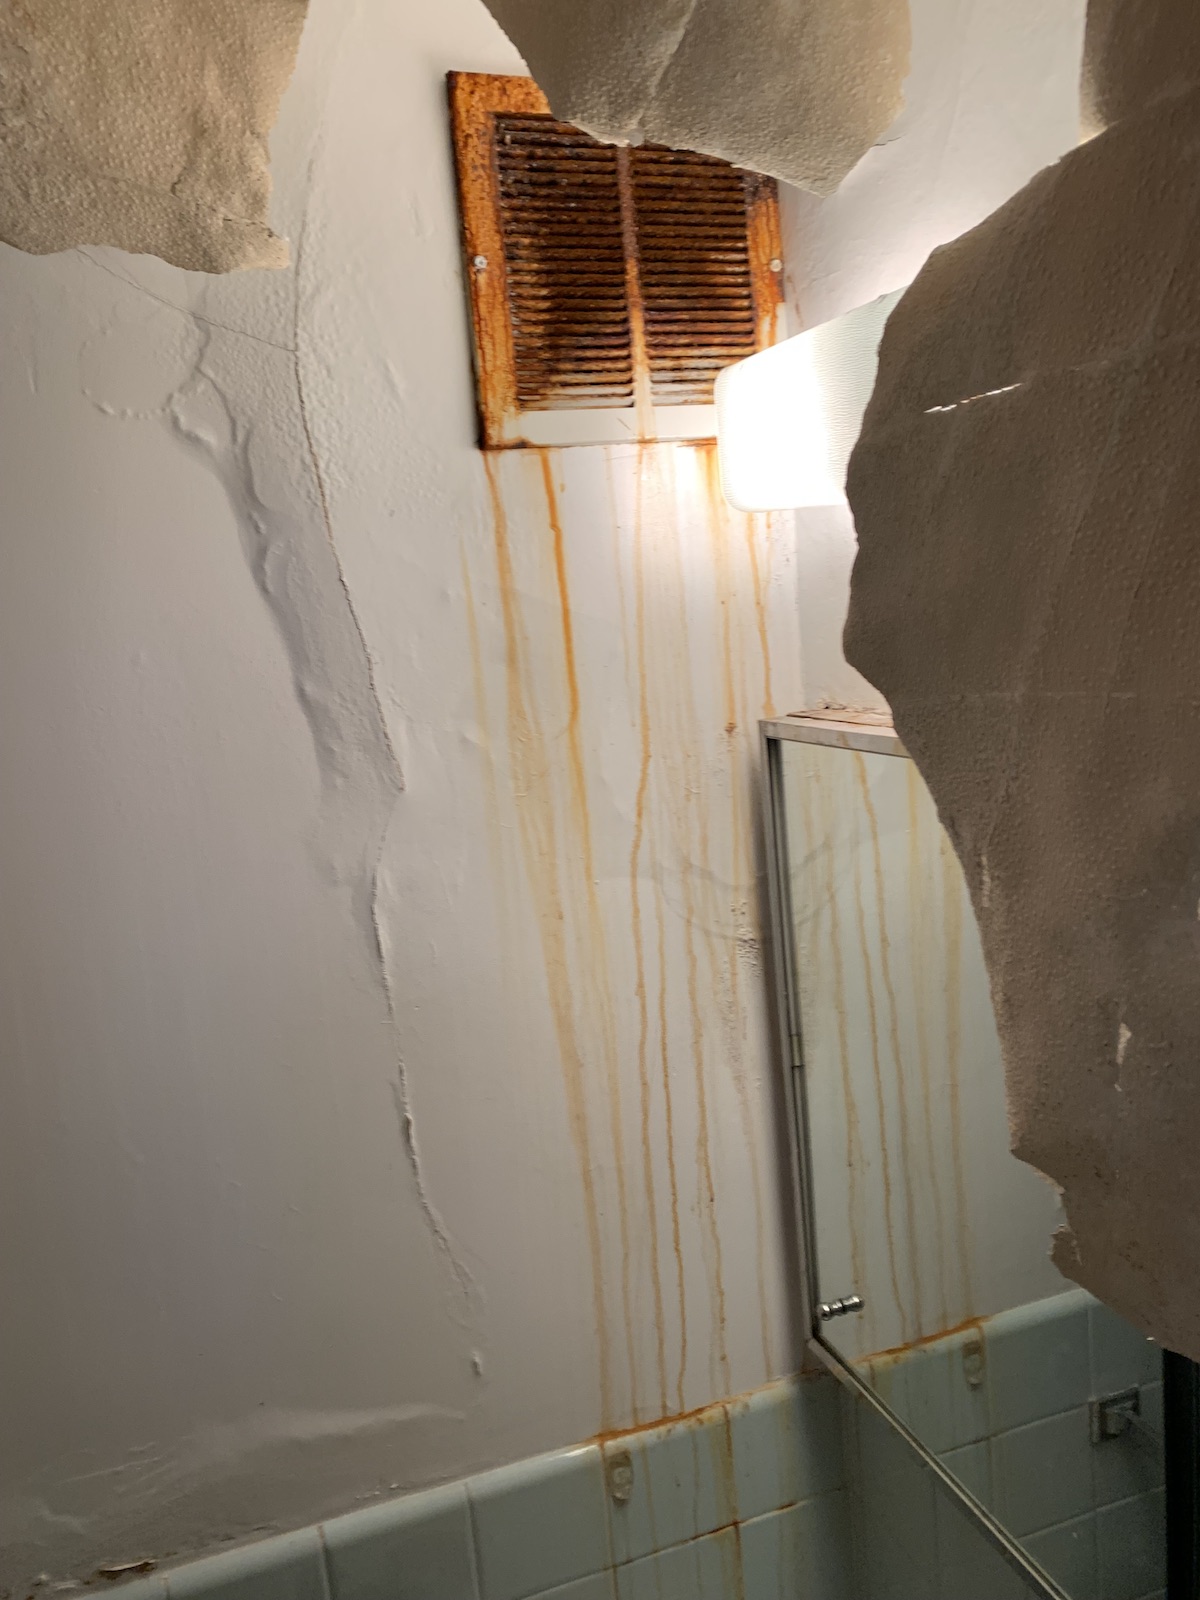 damage caused by mold on the walls and ceilings